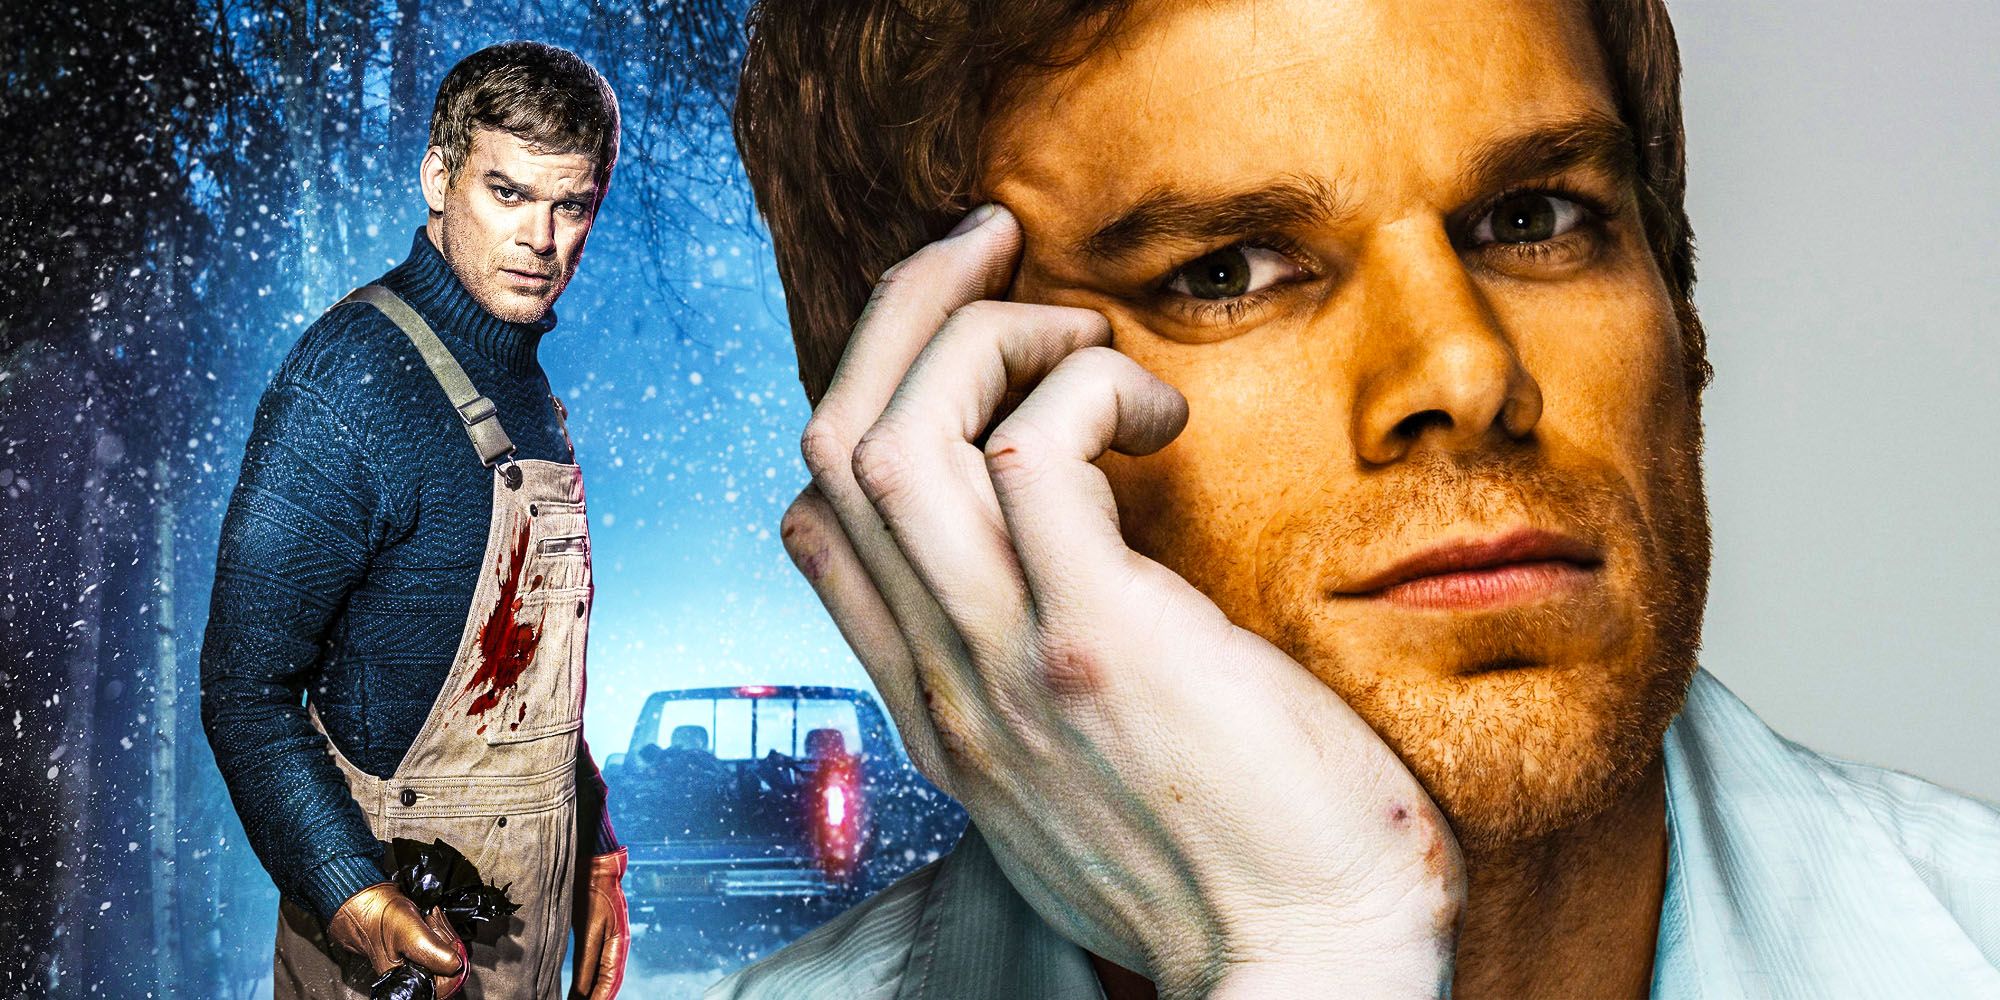 Dexter new blood is different from season 1 through 8